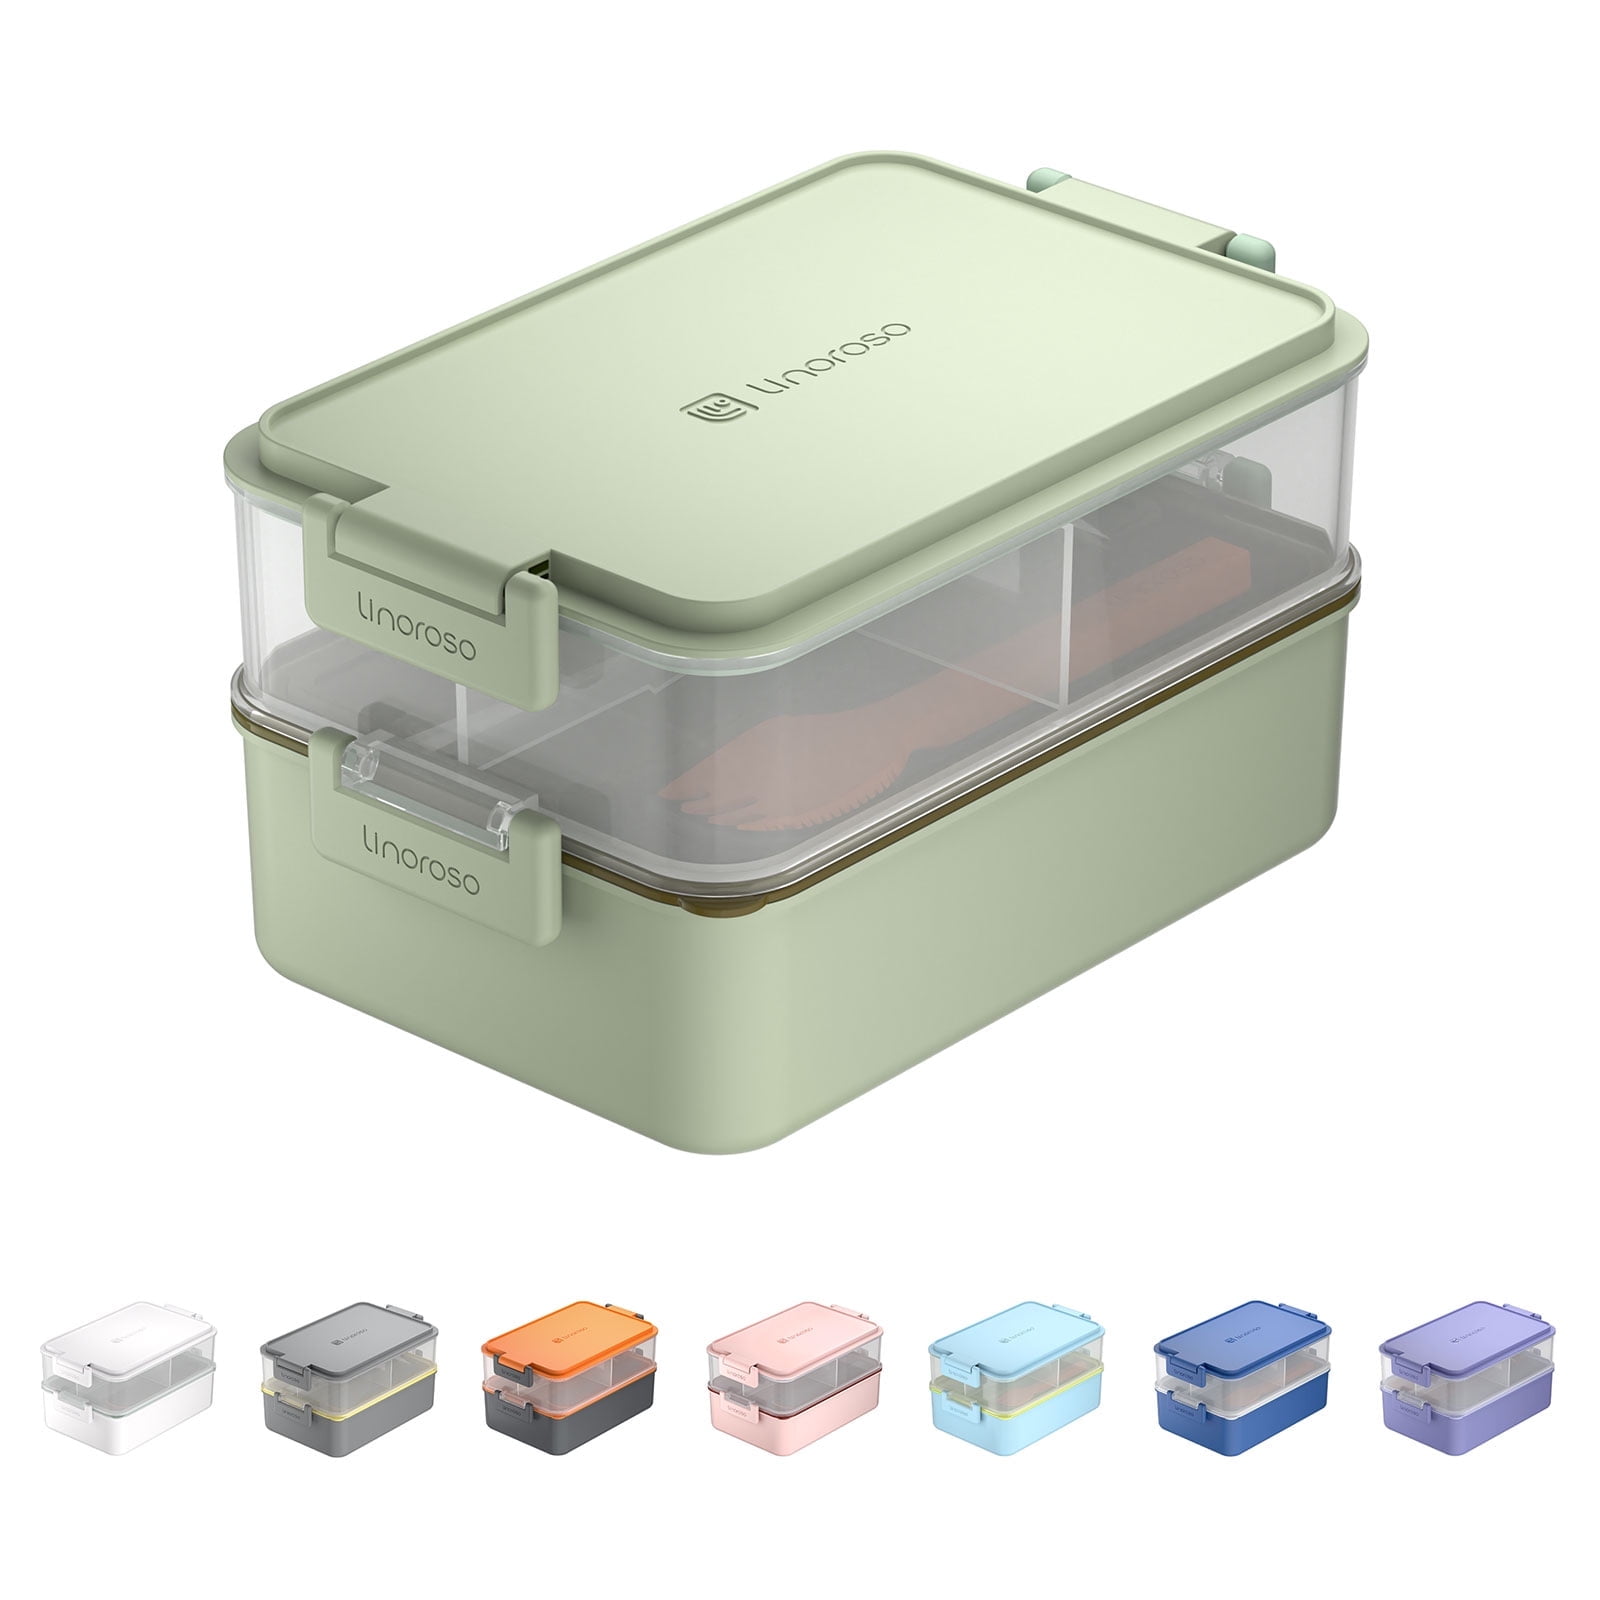 Bentgo Classic (Blue) - All-in-One Stackable Lunch Box Solution - Sleek and  Modern Bento Box Design Includes 2 Stackable Containers, Built-in Plastic  Silverware, and Sealing Strap 